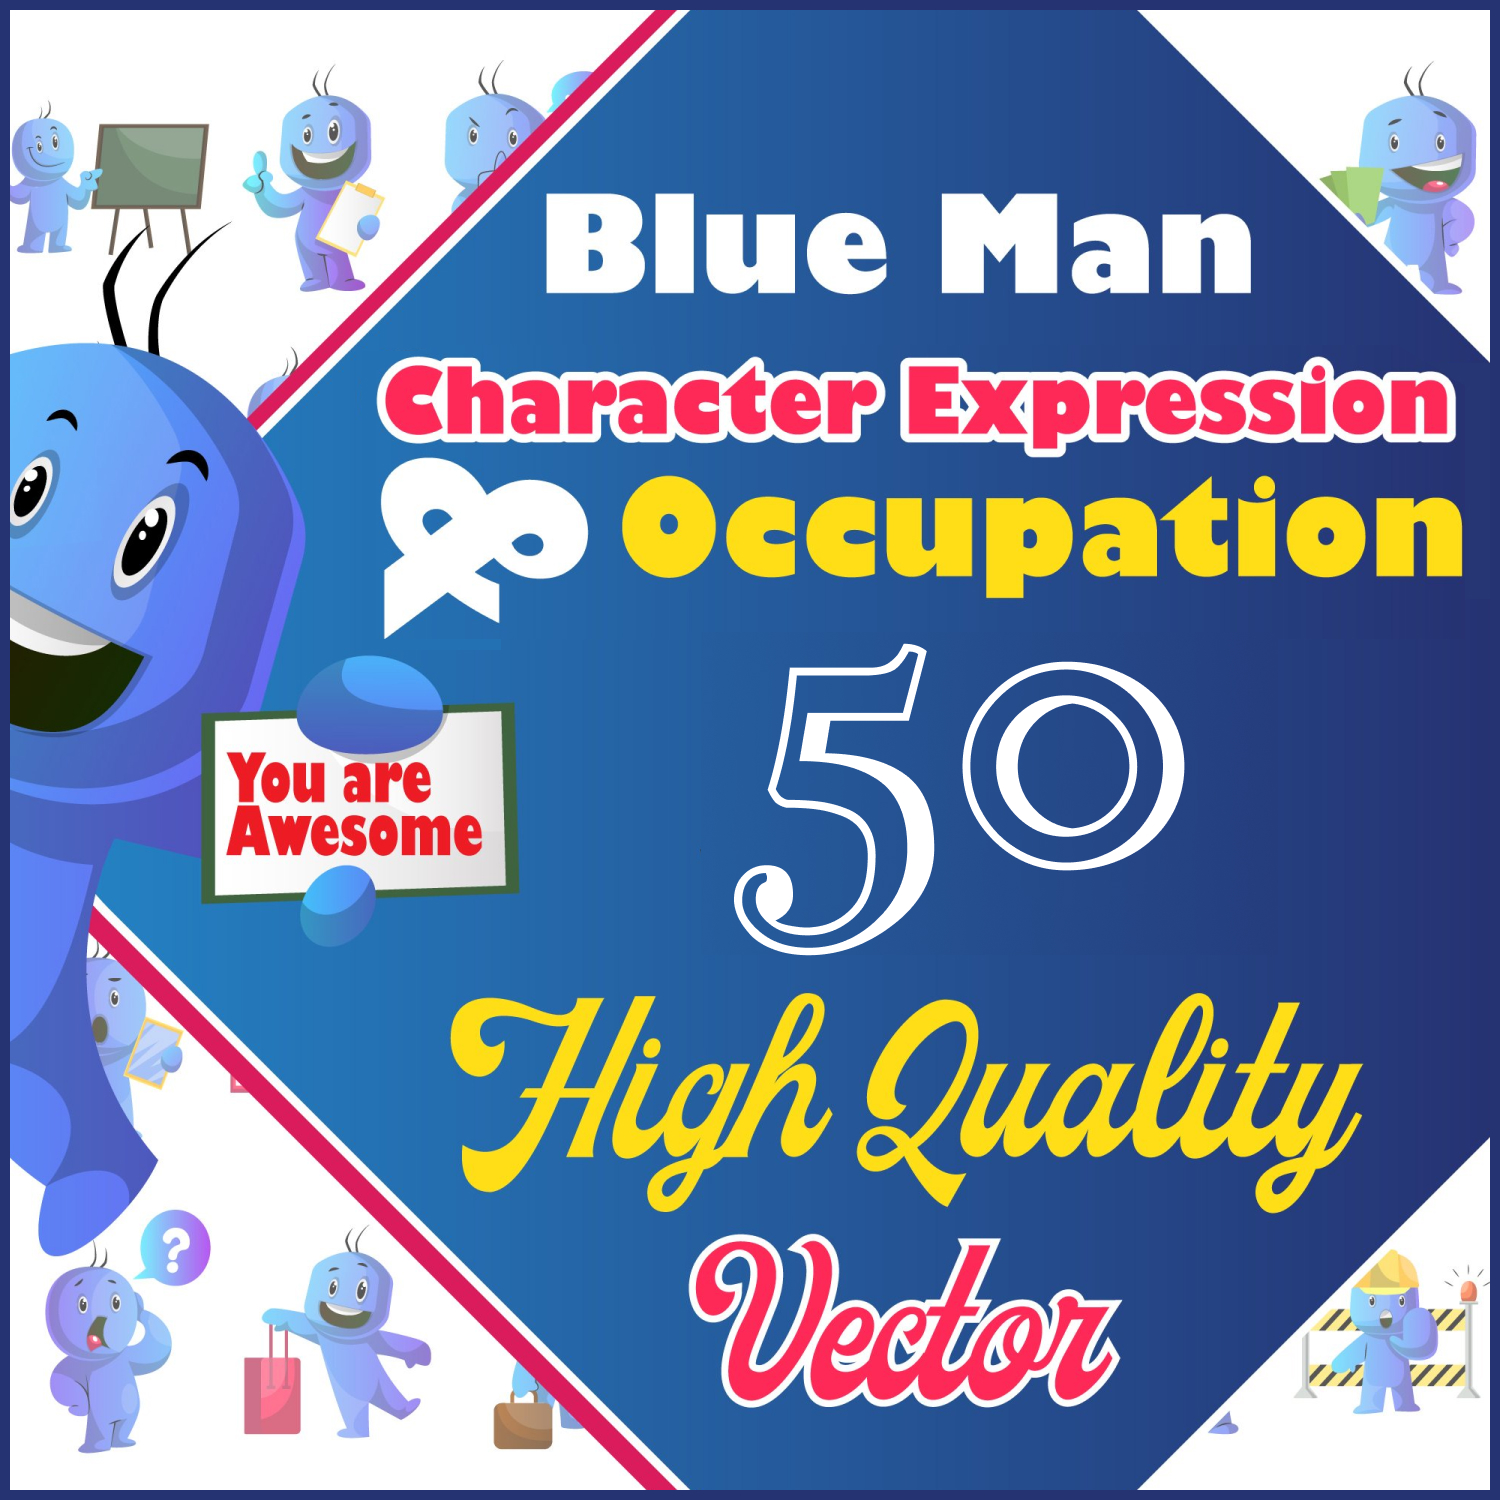 50X Blue Man Character Expression and Occupation Illustration.